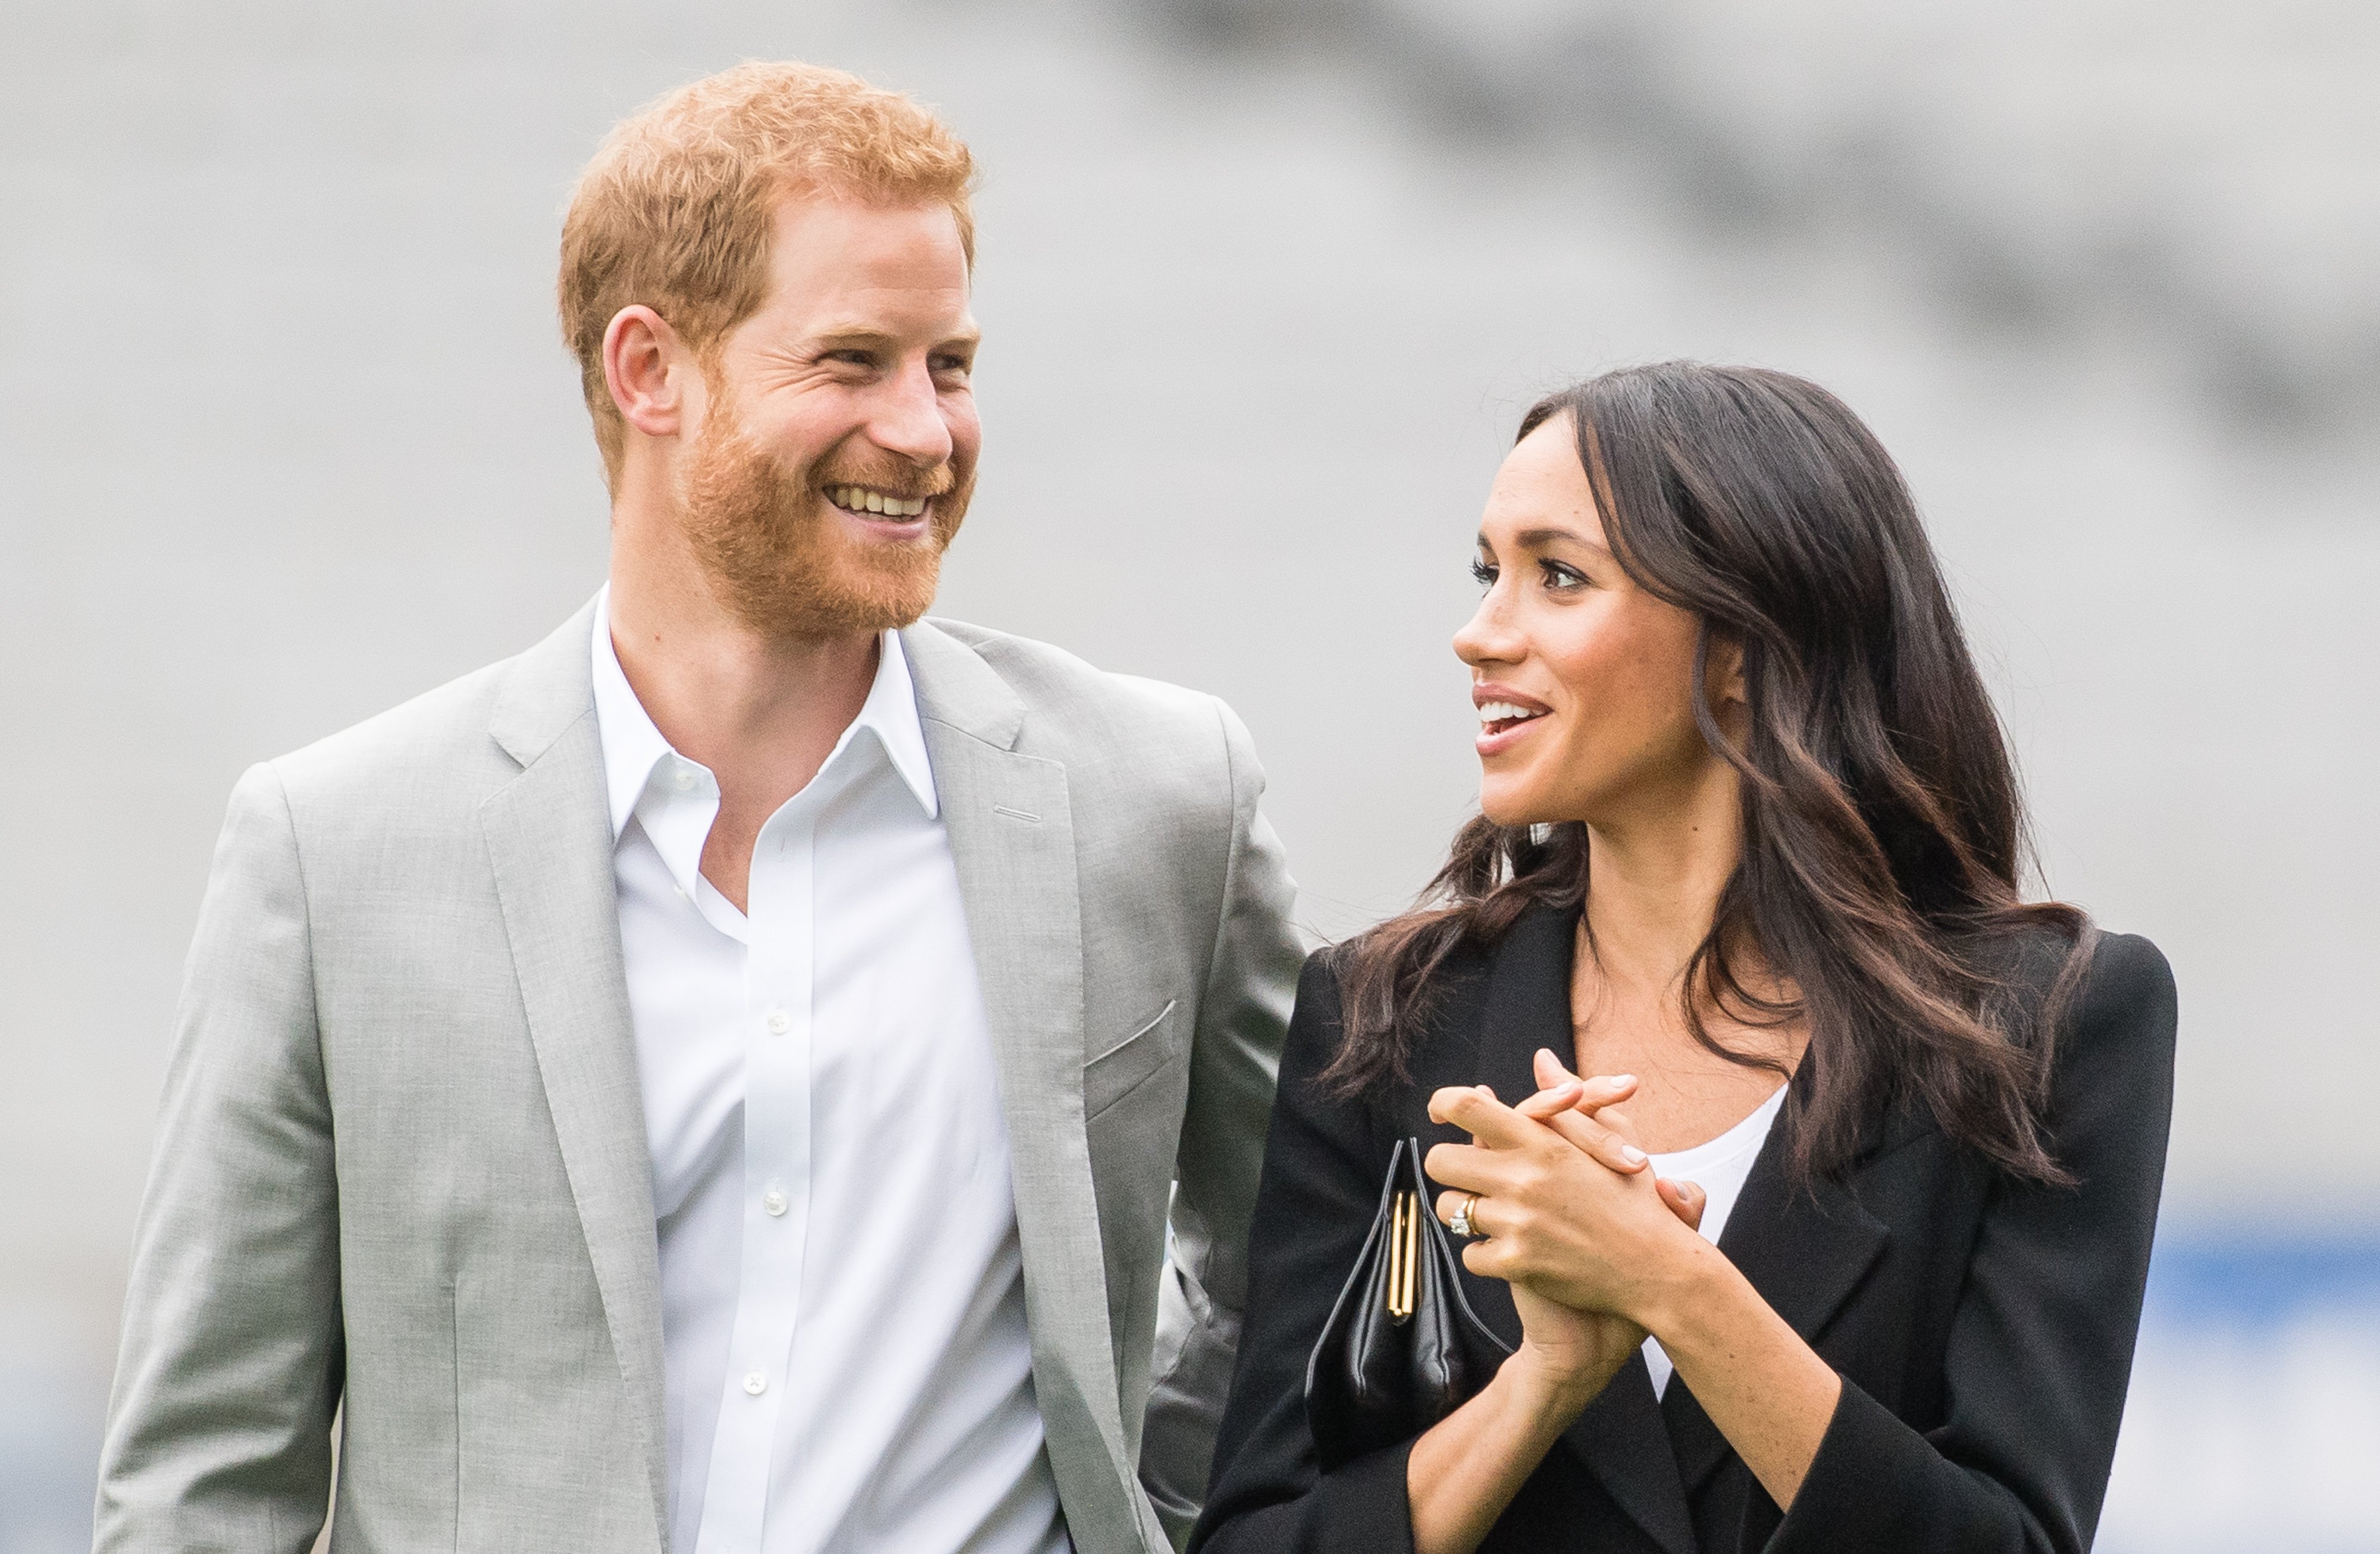 Meghan Markle smiling alongside her husband Prince Harry during a visit to the Gaelic Athletic Association